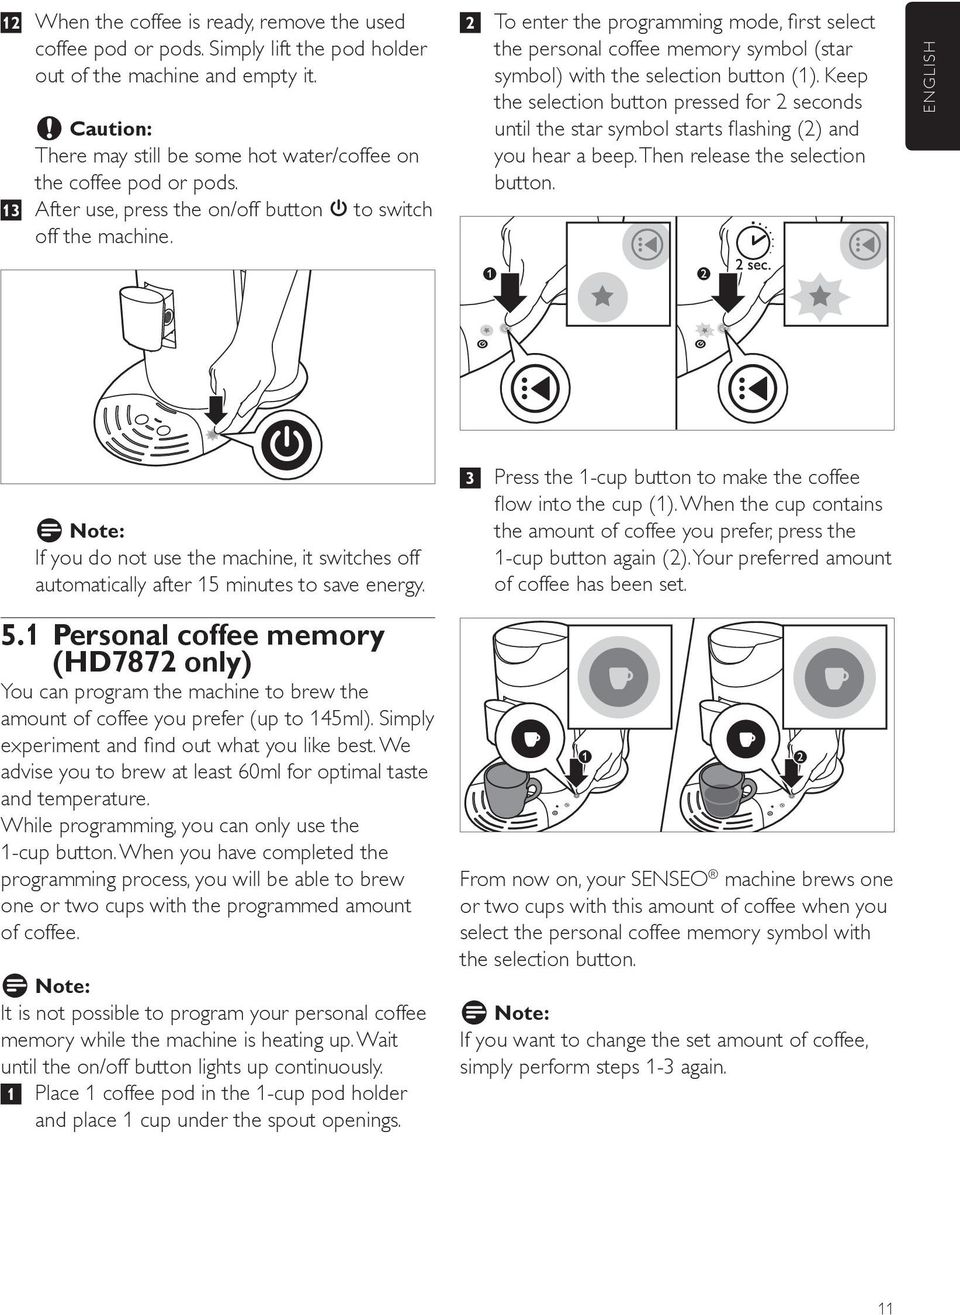 2 To enter the programming mode, first select the personal coffee memory symbol (star symbol) with the selection button (1).